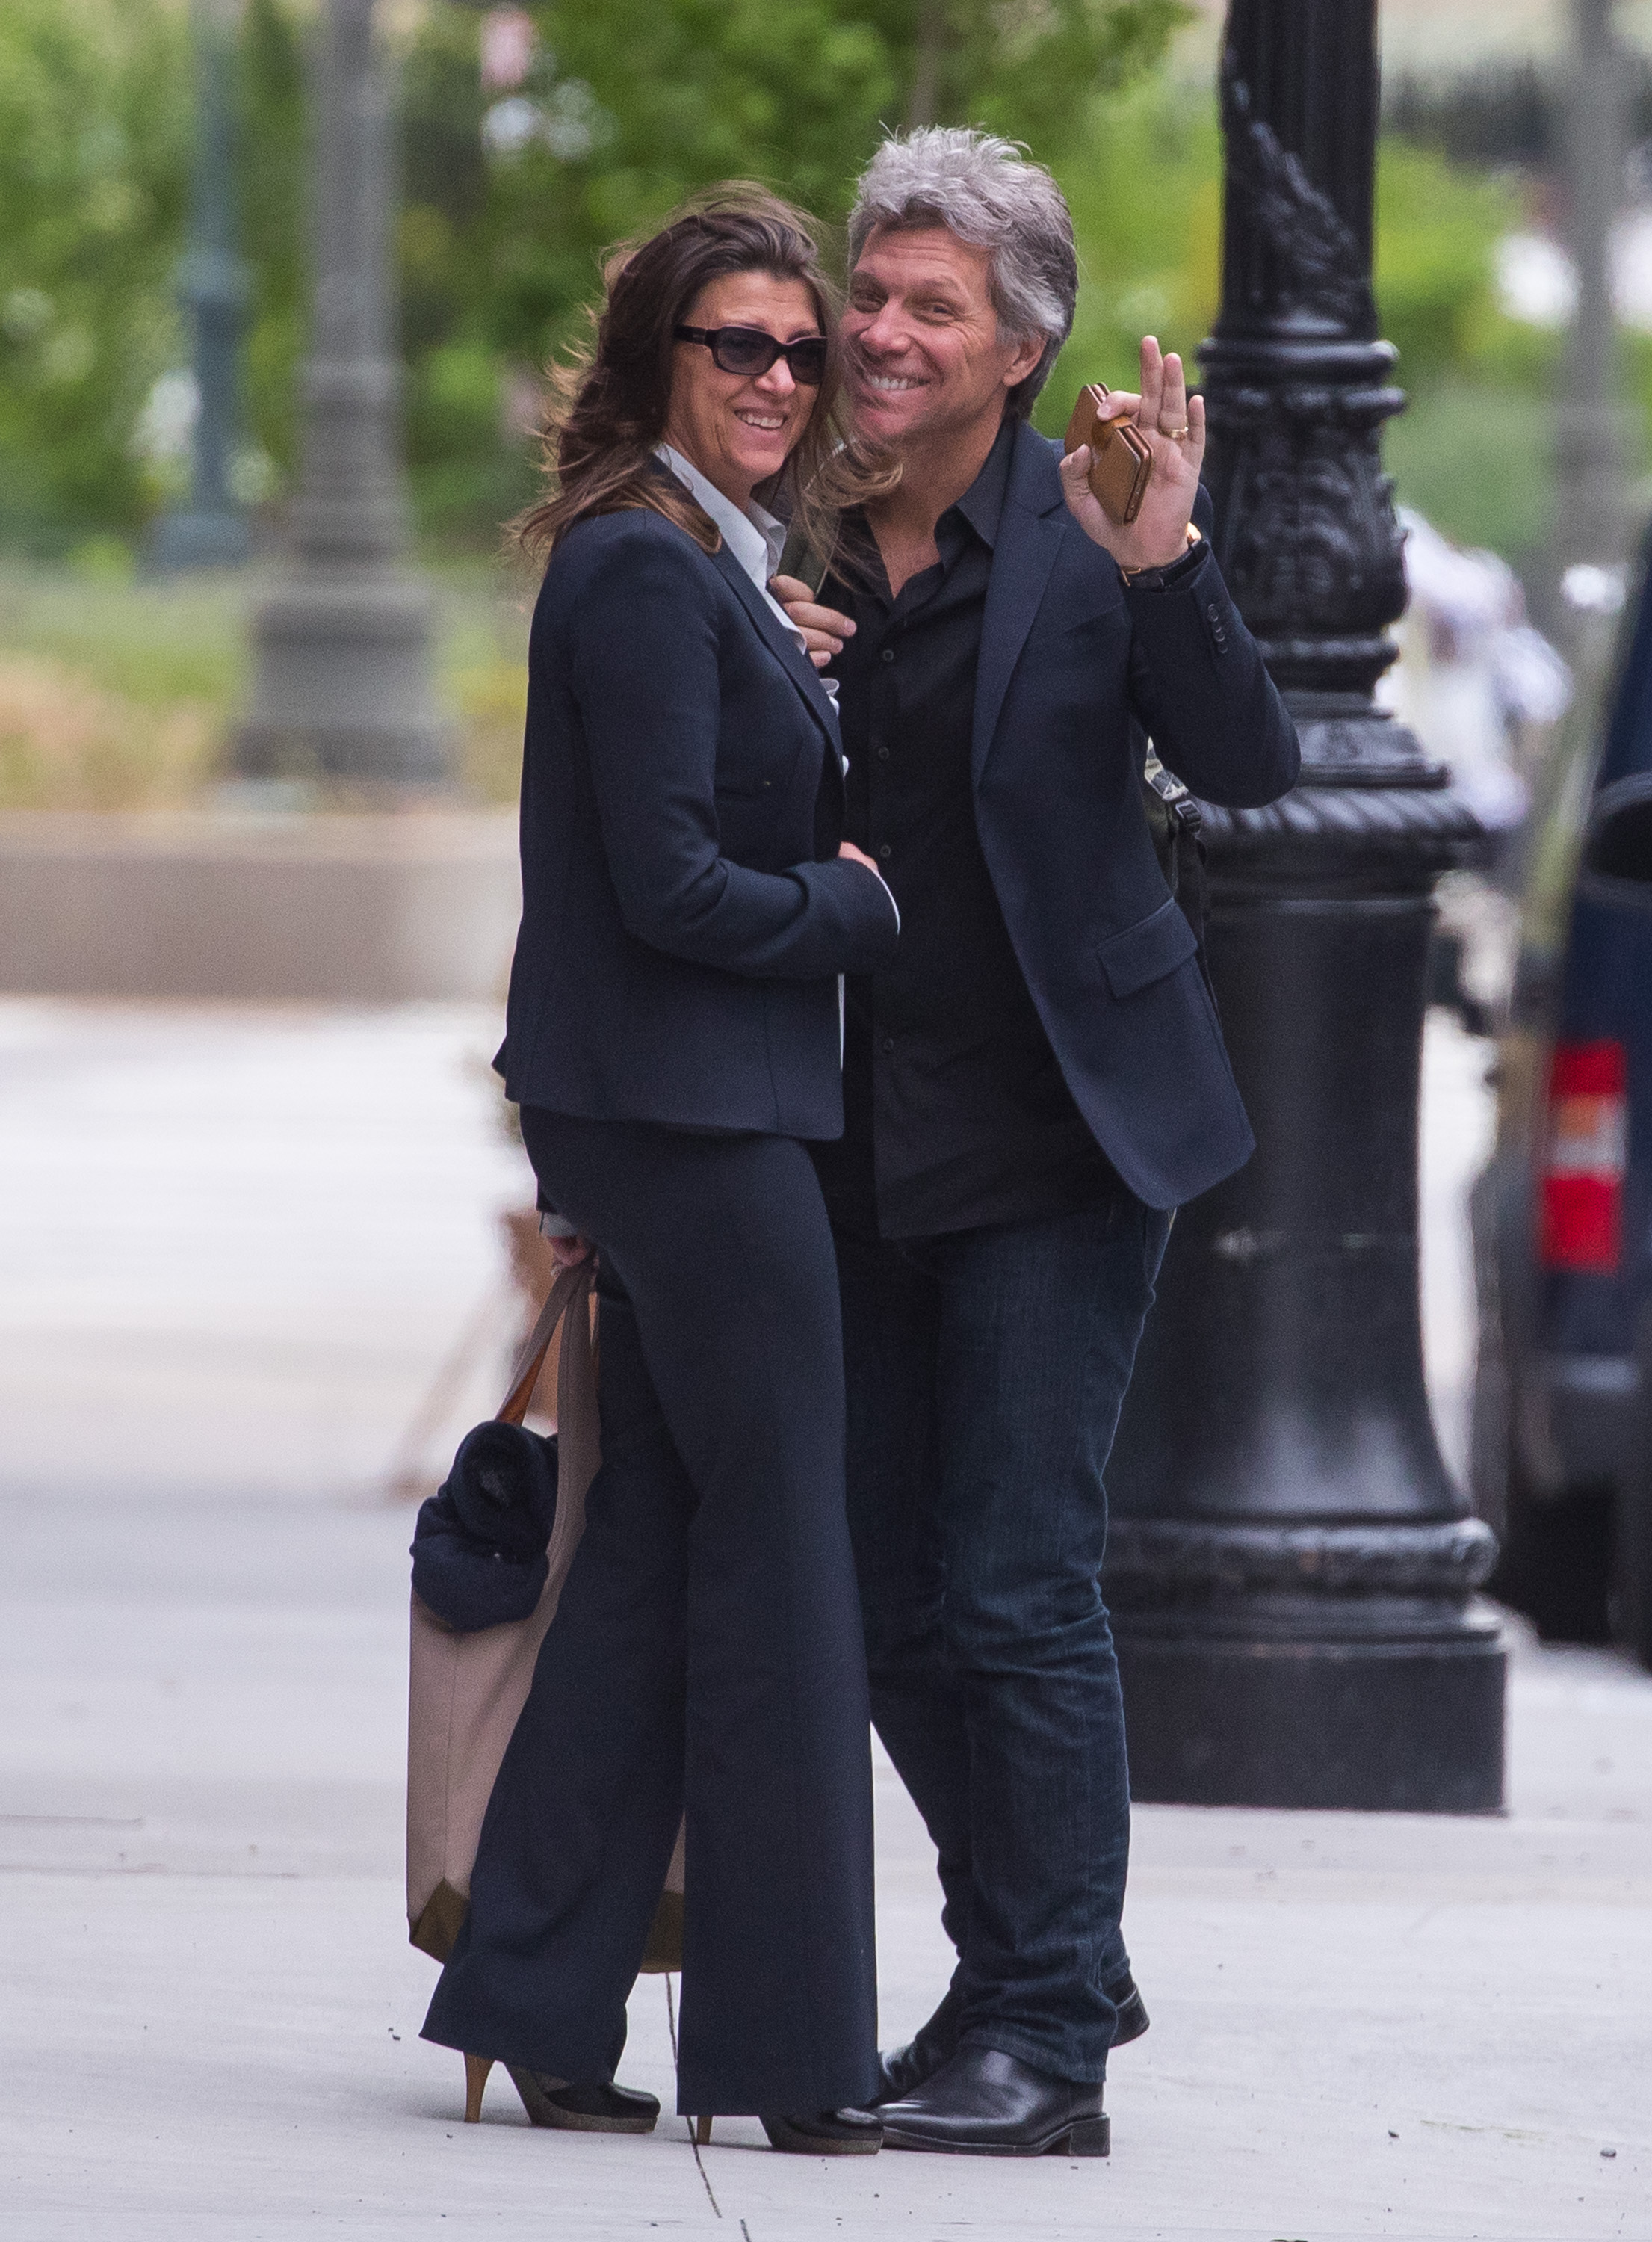 Jon Bon Jovi and Dorothea Hurley outside their New York apartment on May 10, 2016. | Source: Getty Images